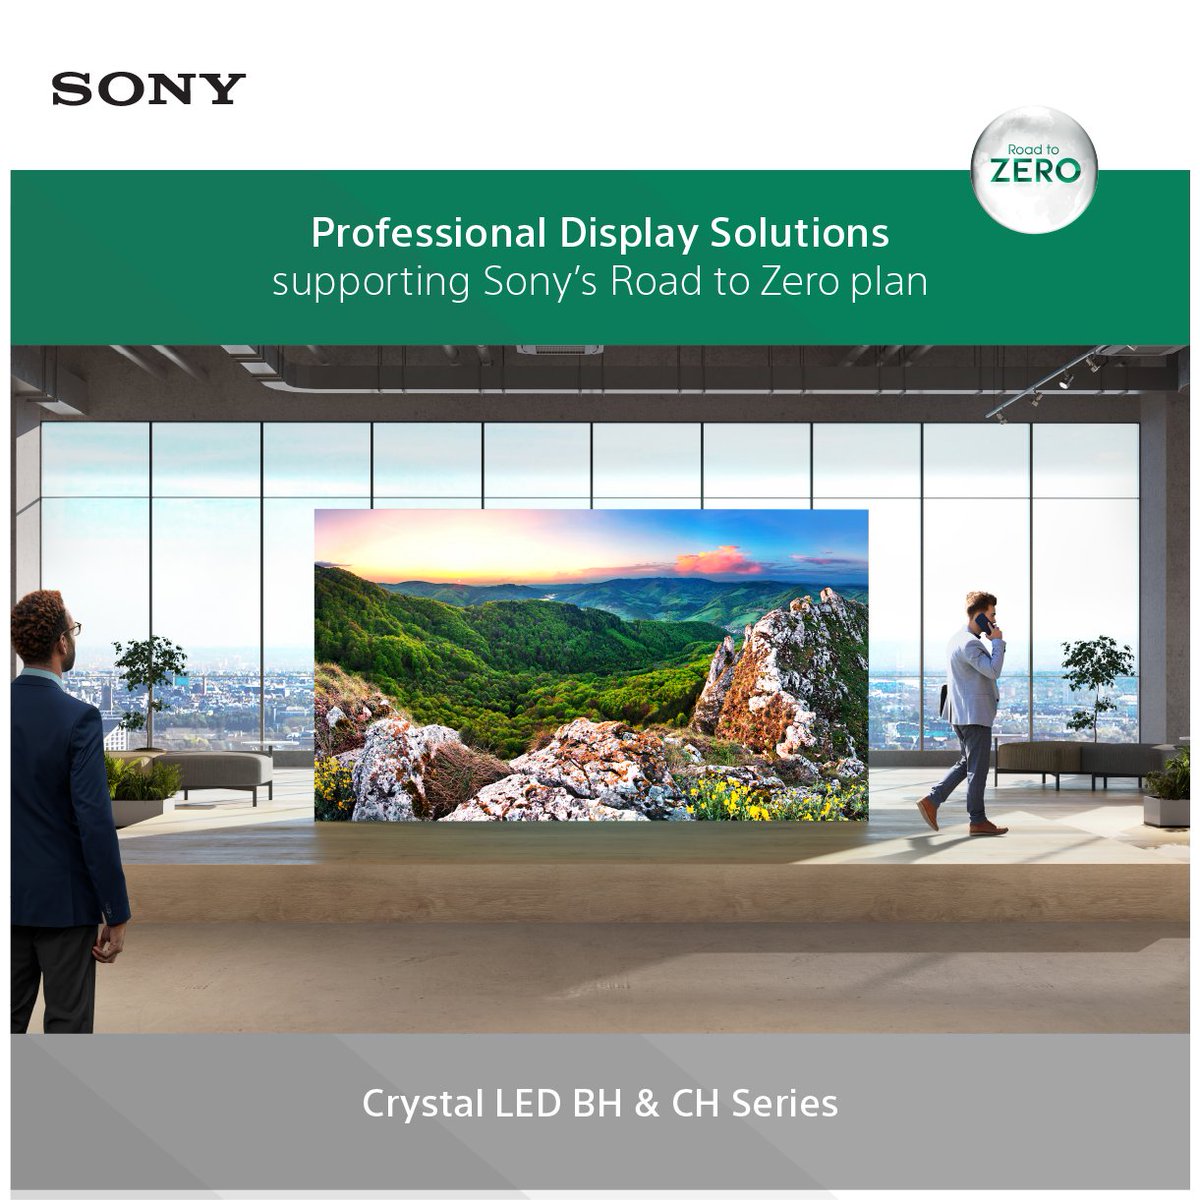 SonyProUSA tweet picture